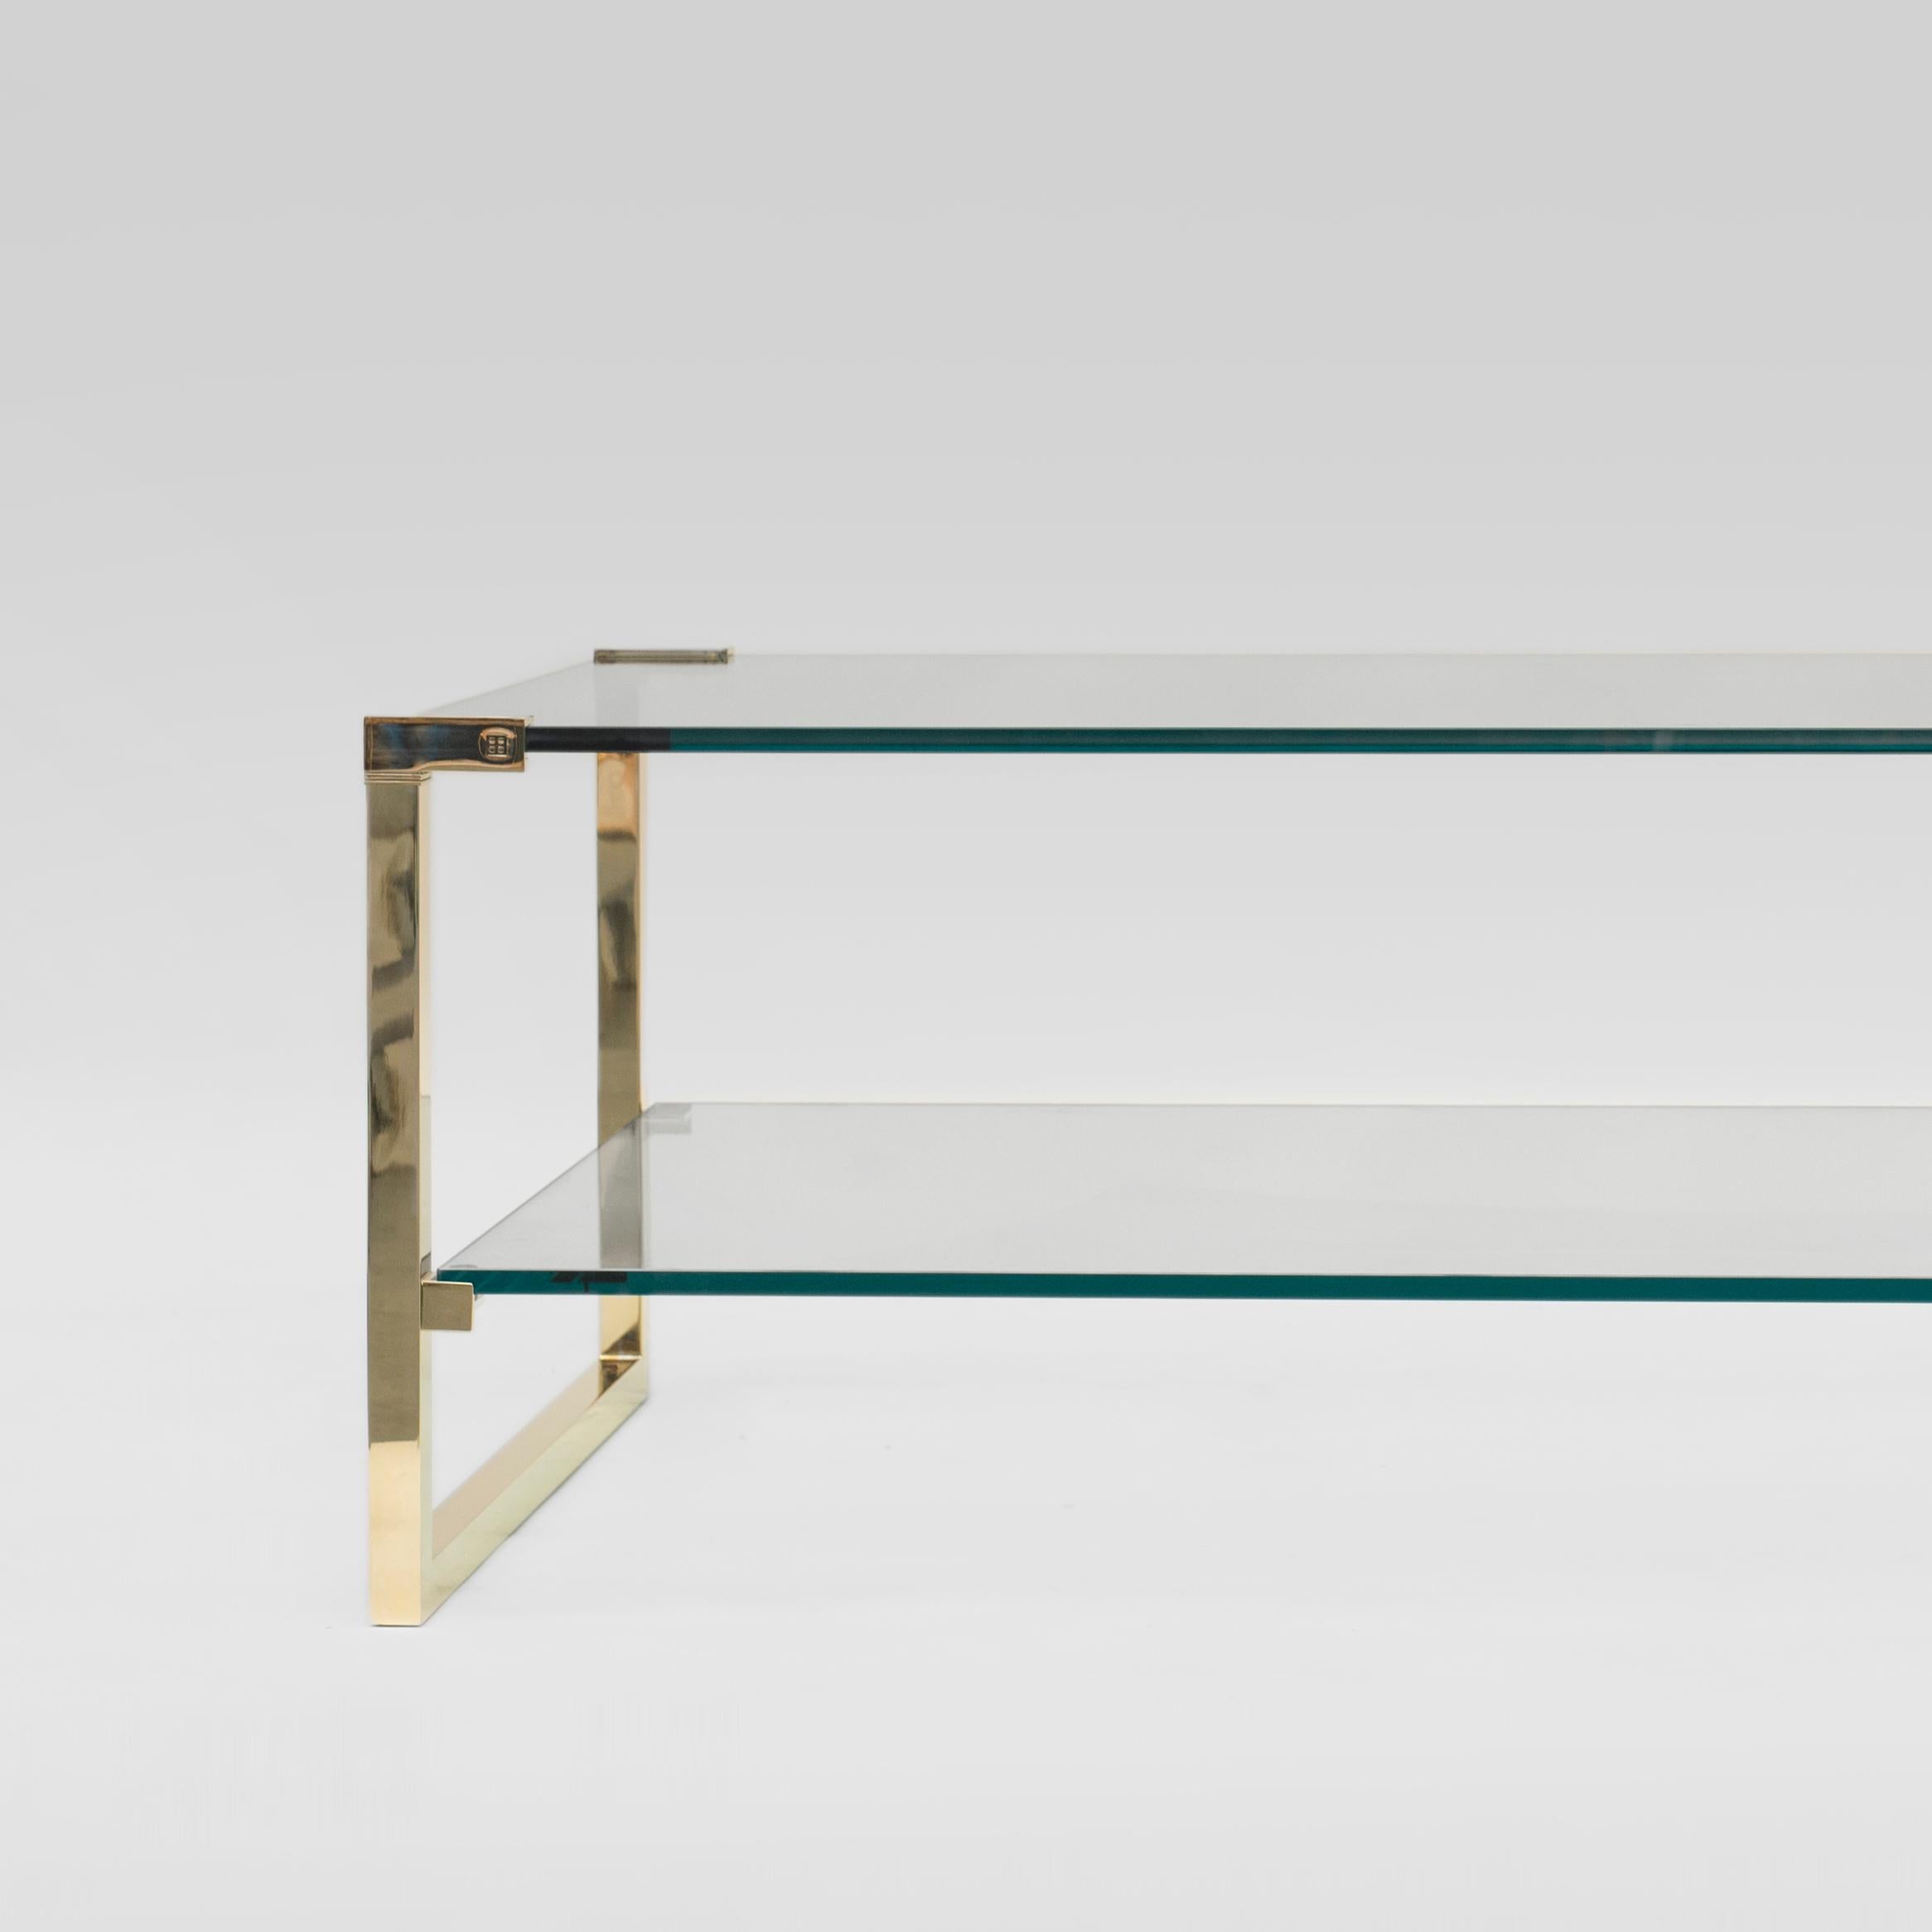 Table designed by Peter Ghyczy.
Manufactured by Ghyczy (Netherlands)

The twin frames are constructed of 3 × 3 square tubes and secured to the tabletop by cast metal details. The strong construction makes this table versatile, fitting every